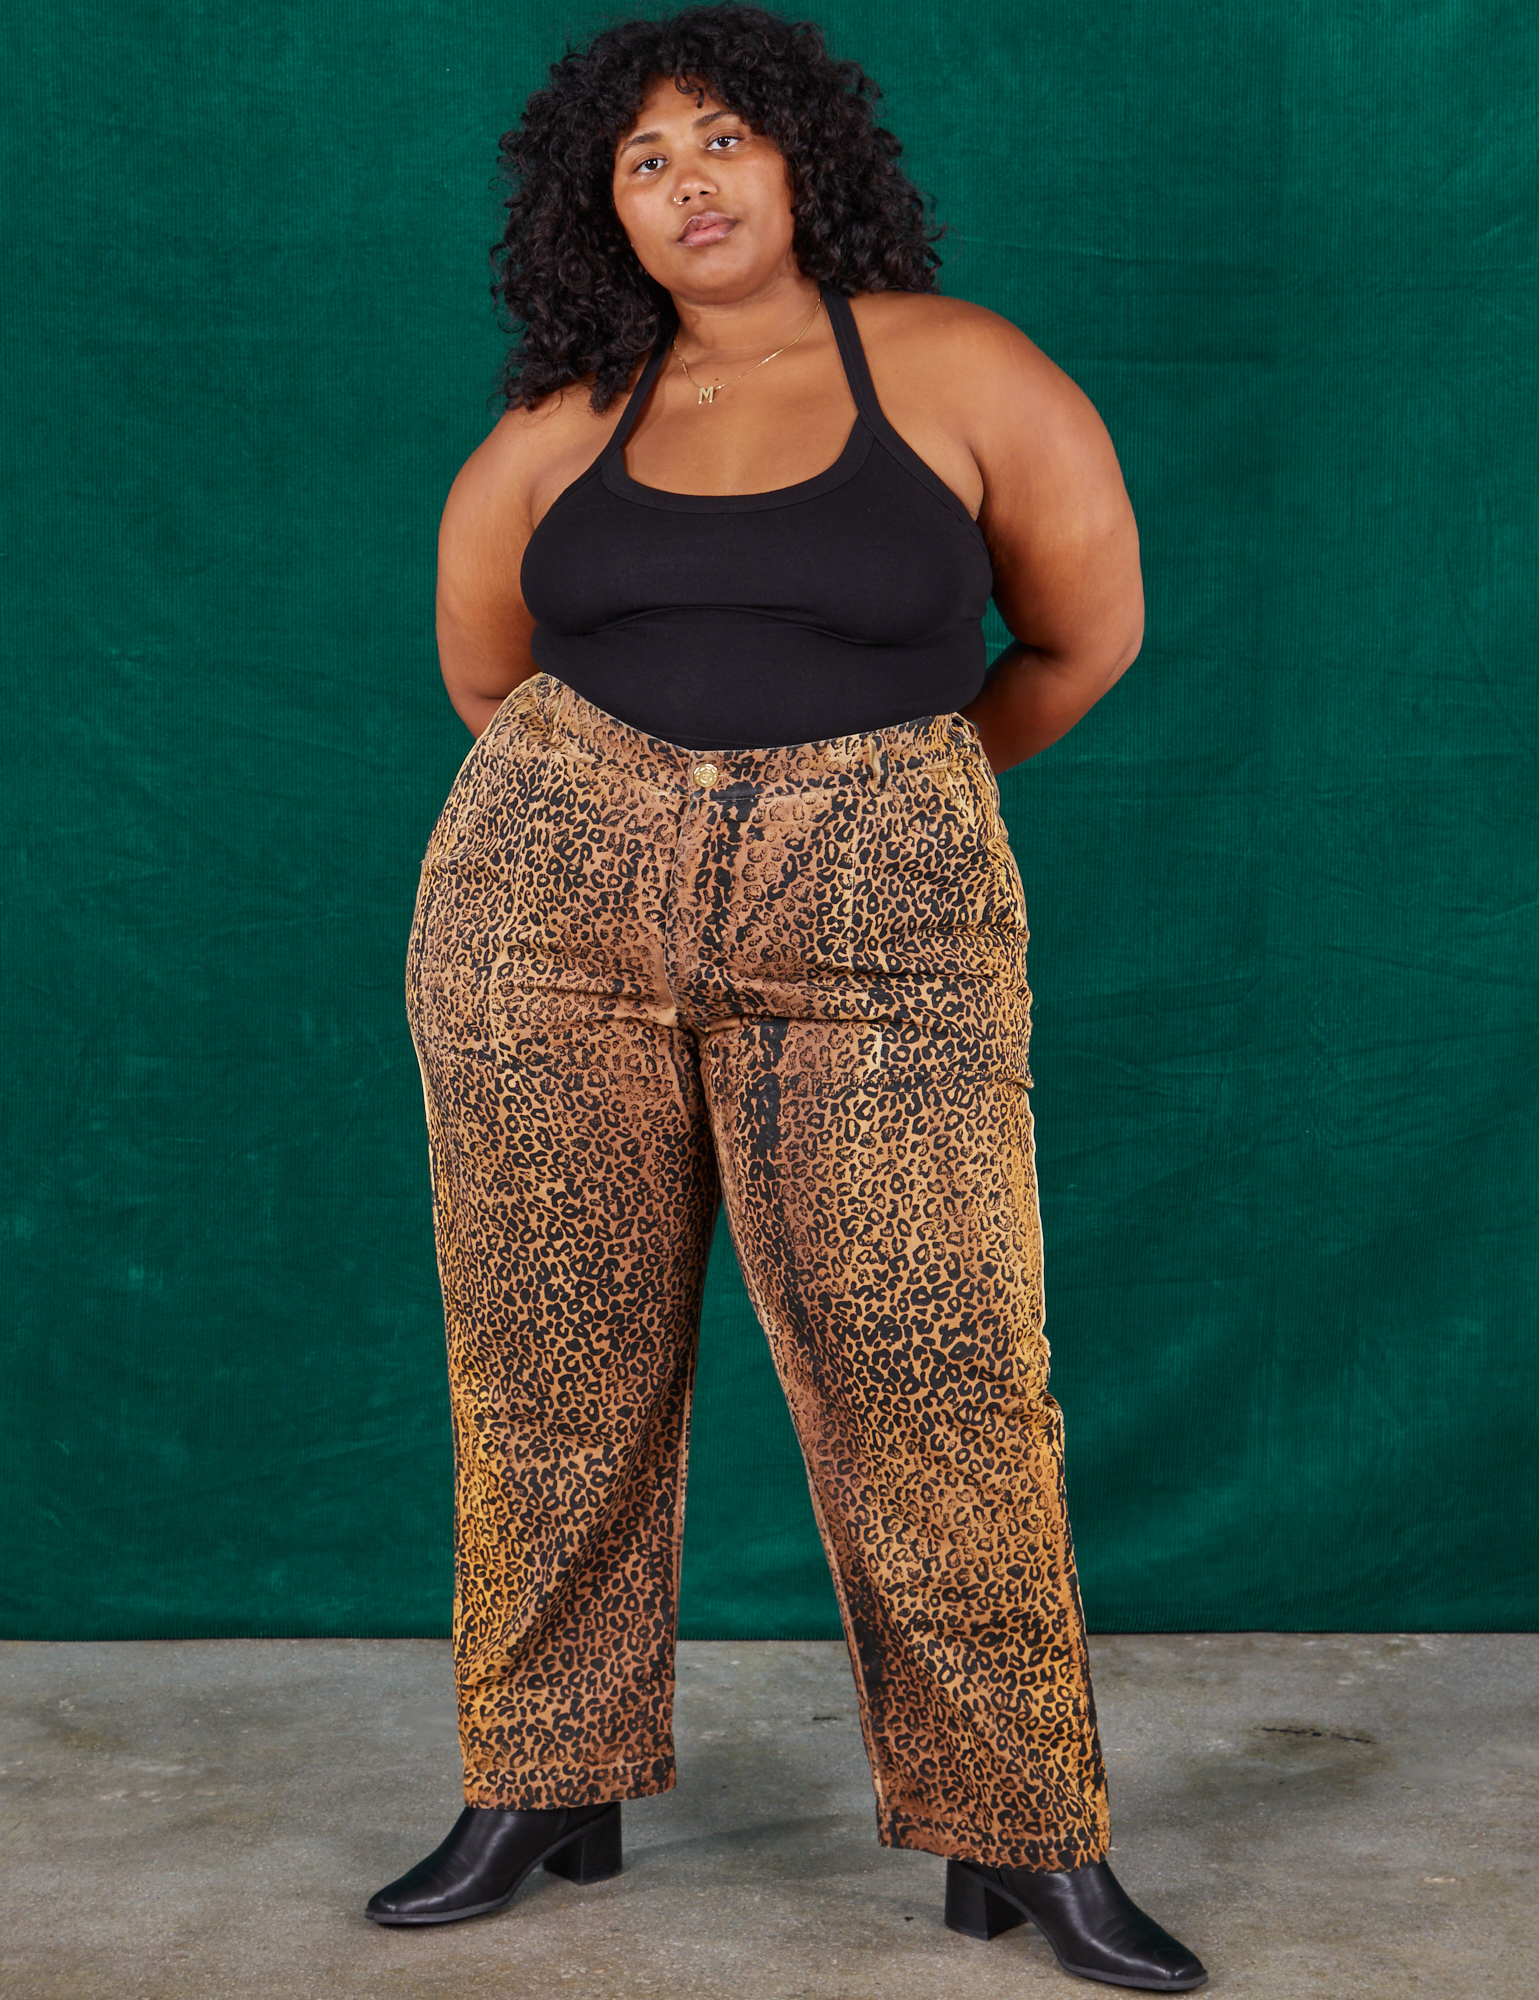 Morgan is 5&#39;5&quot; and wearing 2XL Leopard Work Pants and black Halter Top